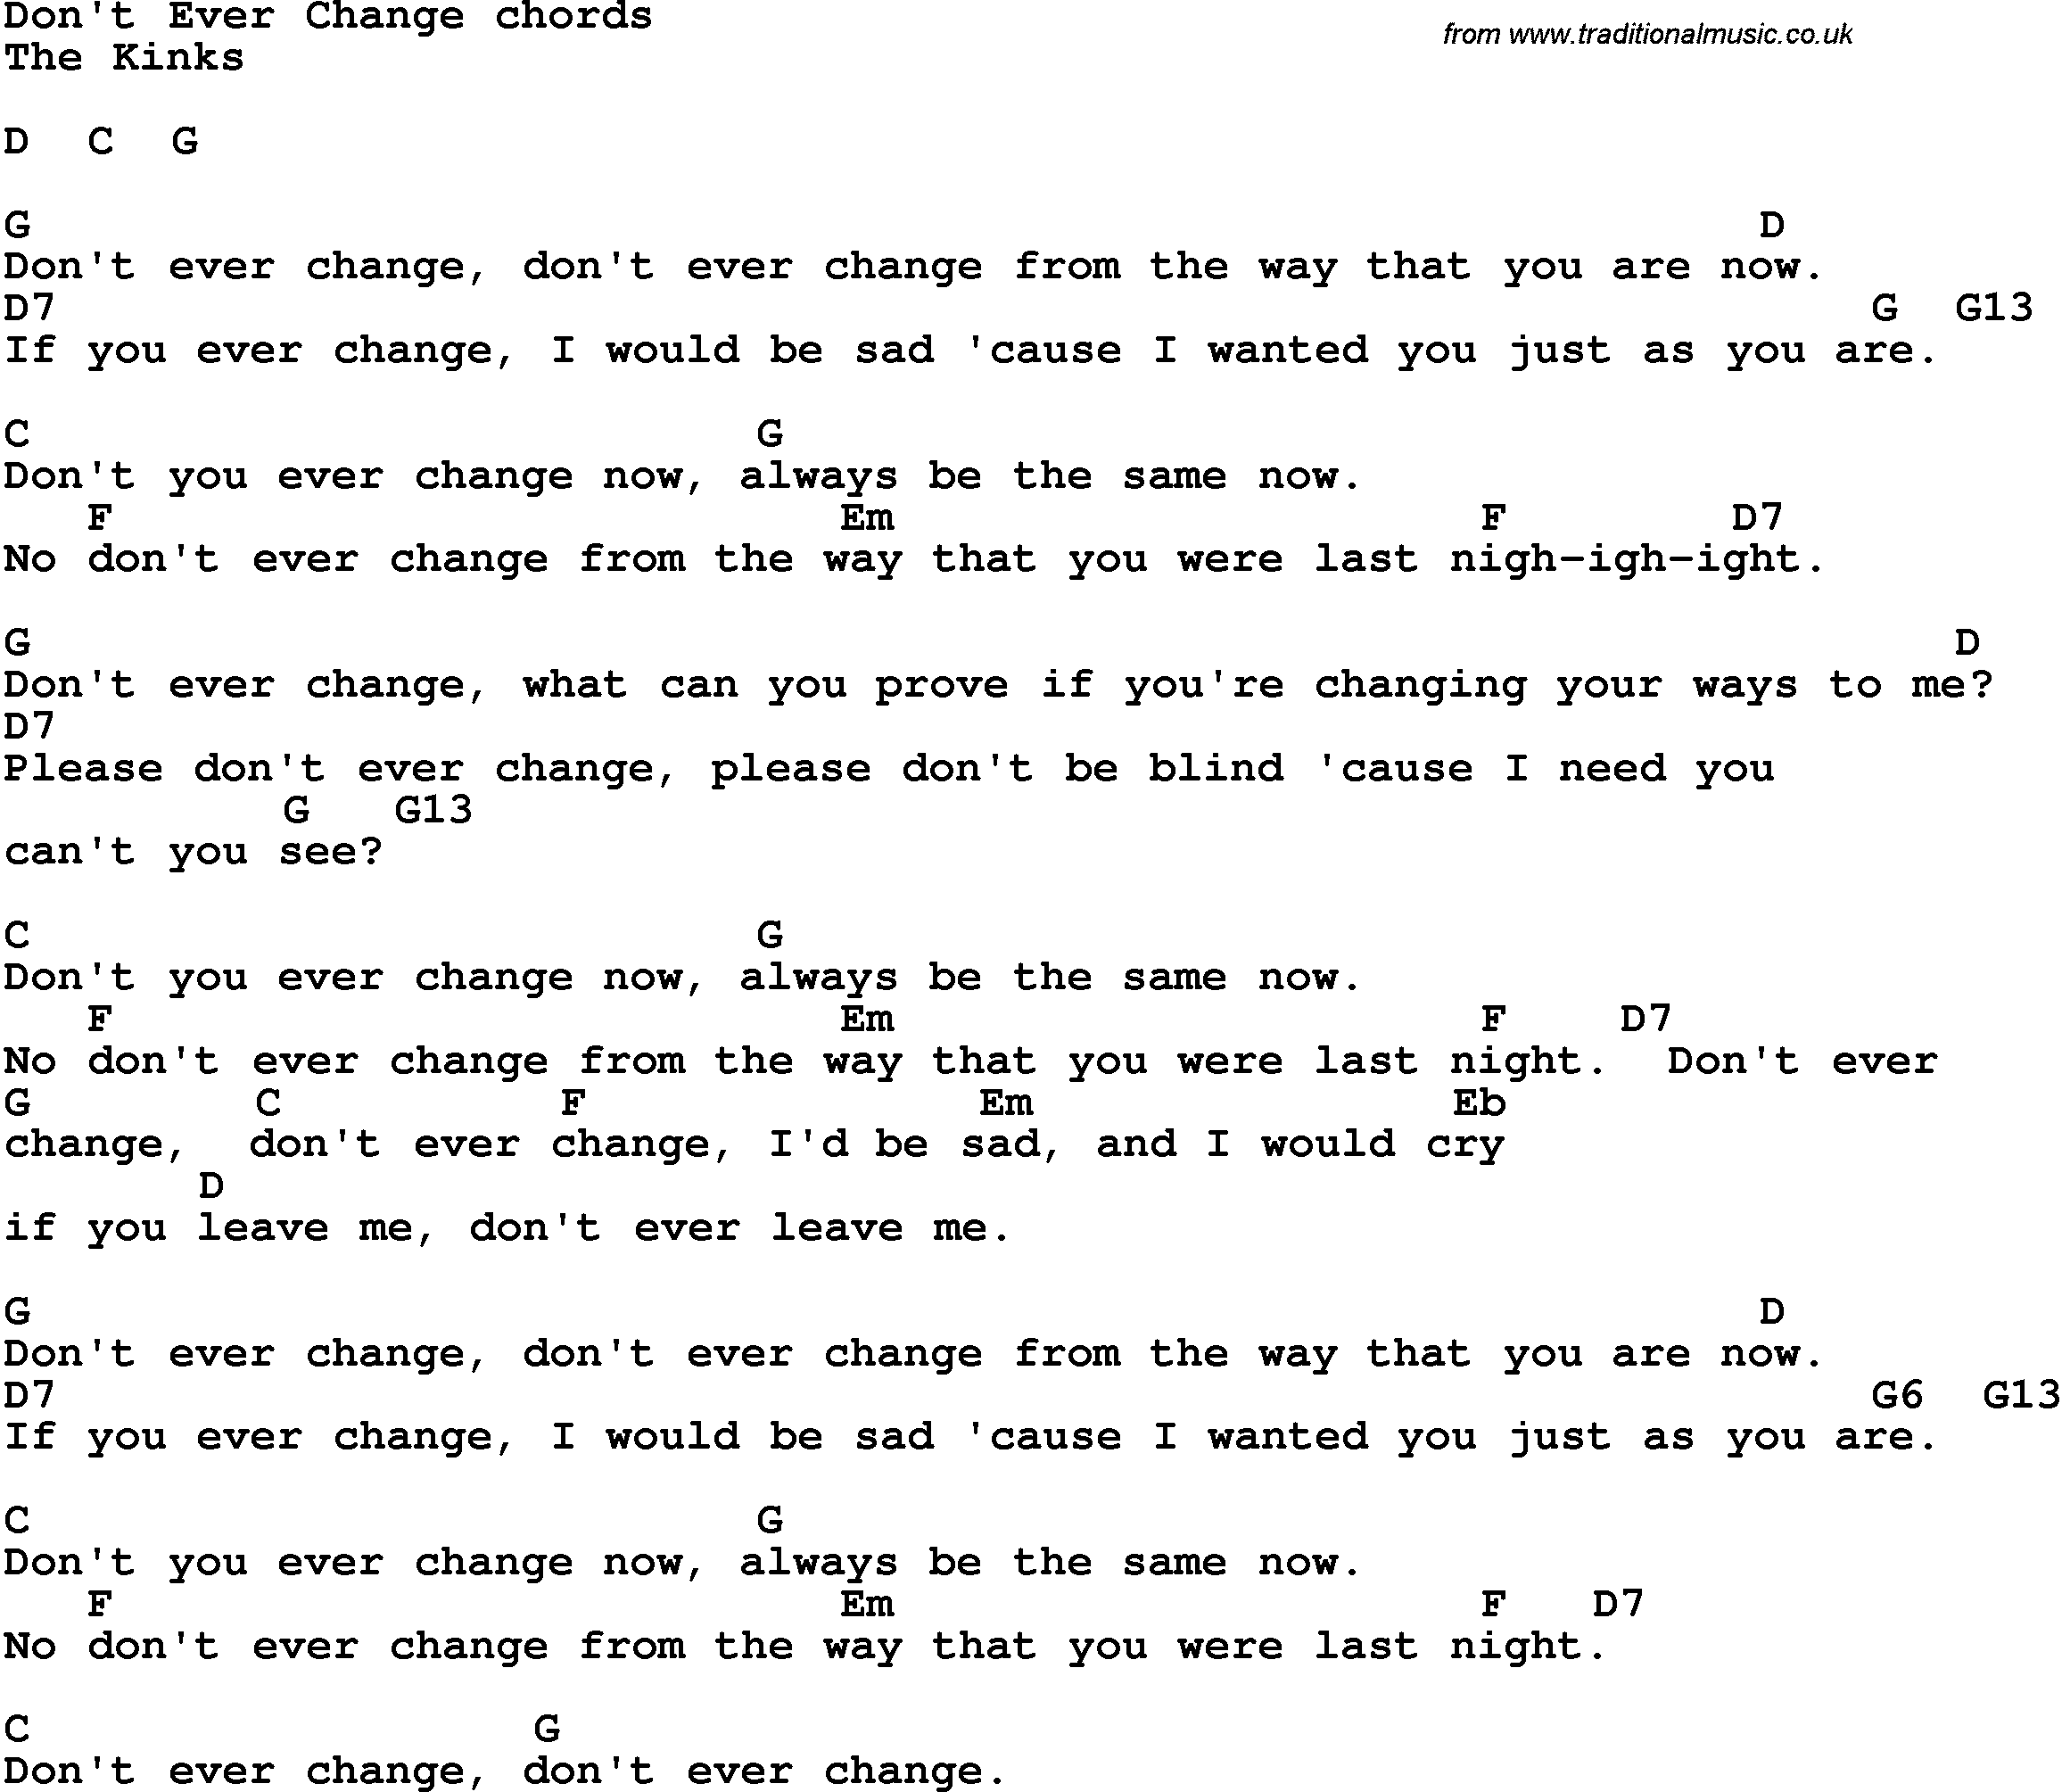 Song Lyrics with guitar chords for Don't Ever Change